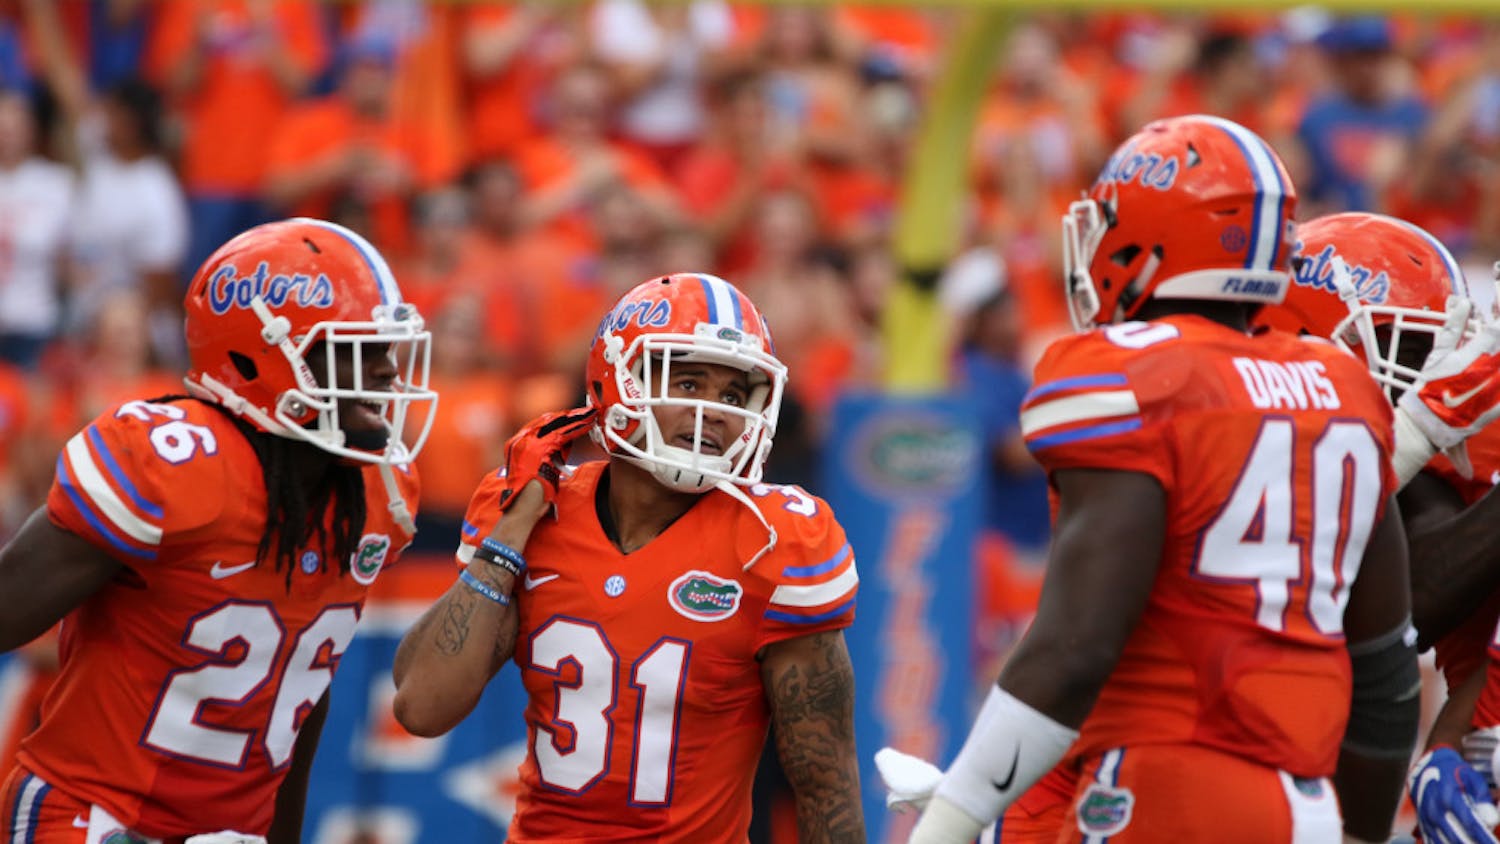 Jalen tabor (31) celebrates with teammates after intercepting a pass during Florida's 45-7 win over Kentucky on Sept. 10, 2016, at Ben Hill Griffin Stadium.